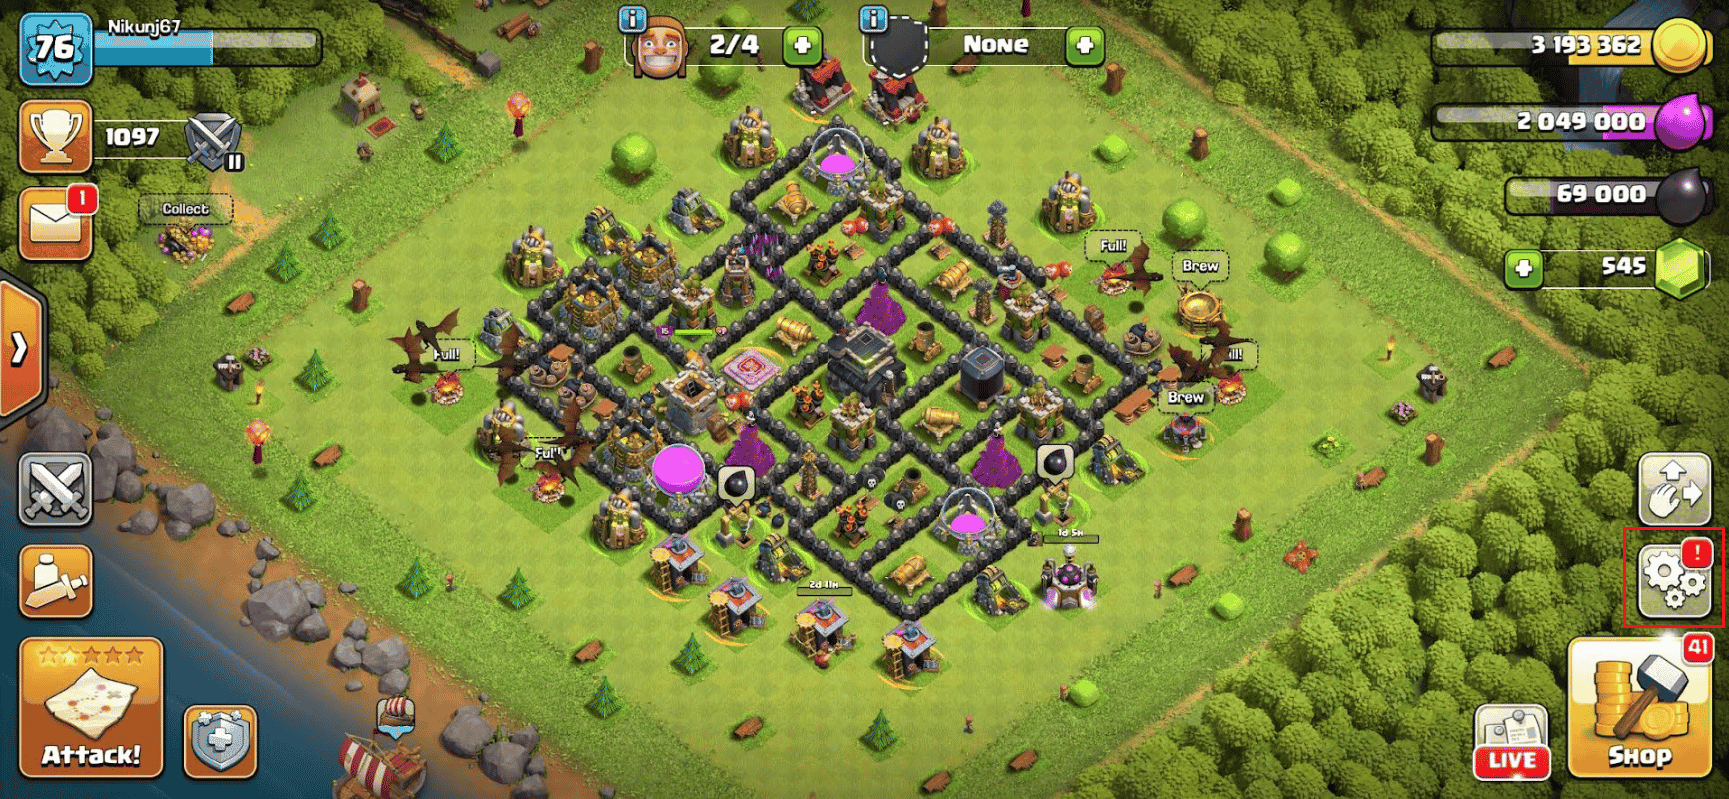 tap on the Settings icon | How to Restart without Resetting Clash of Clans